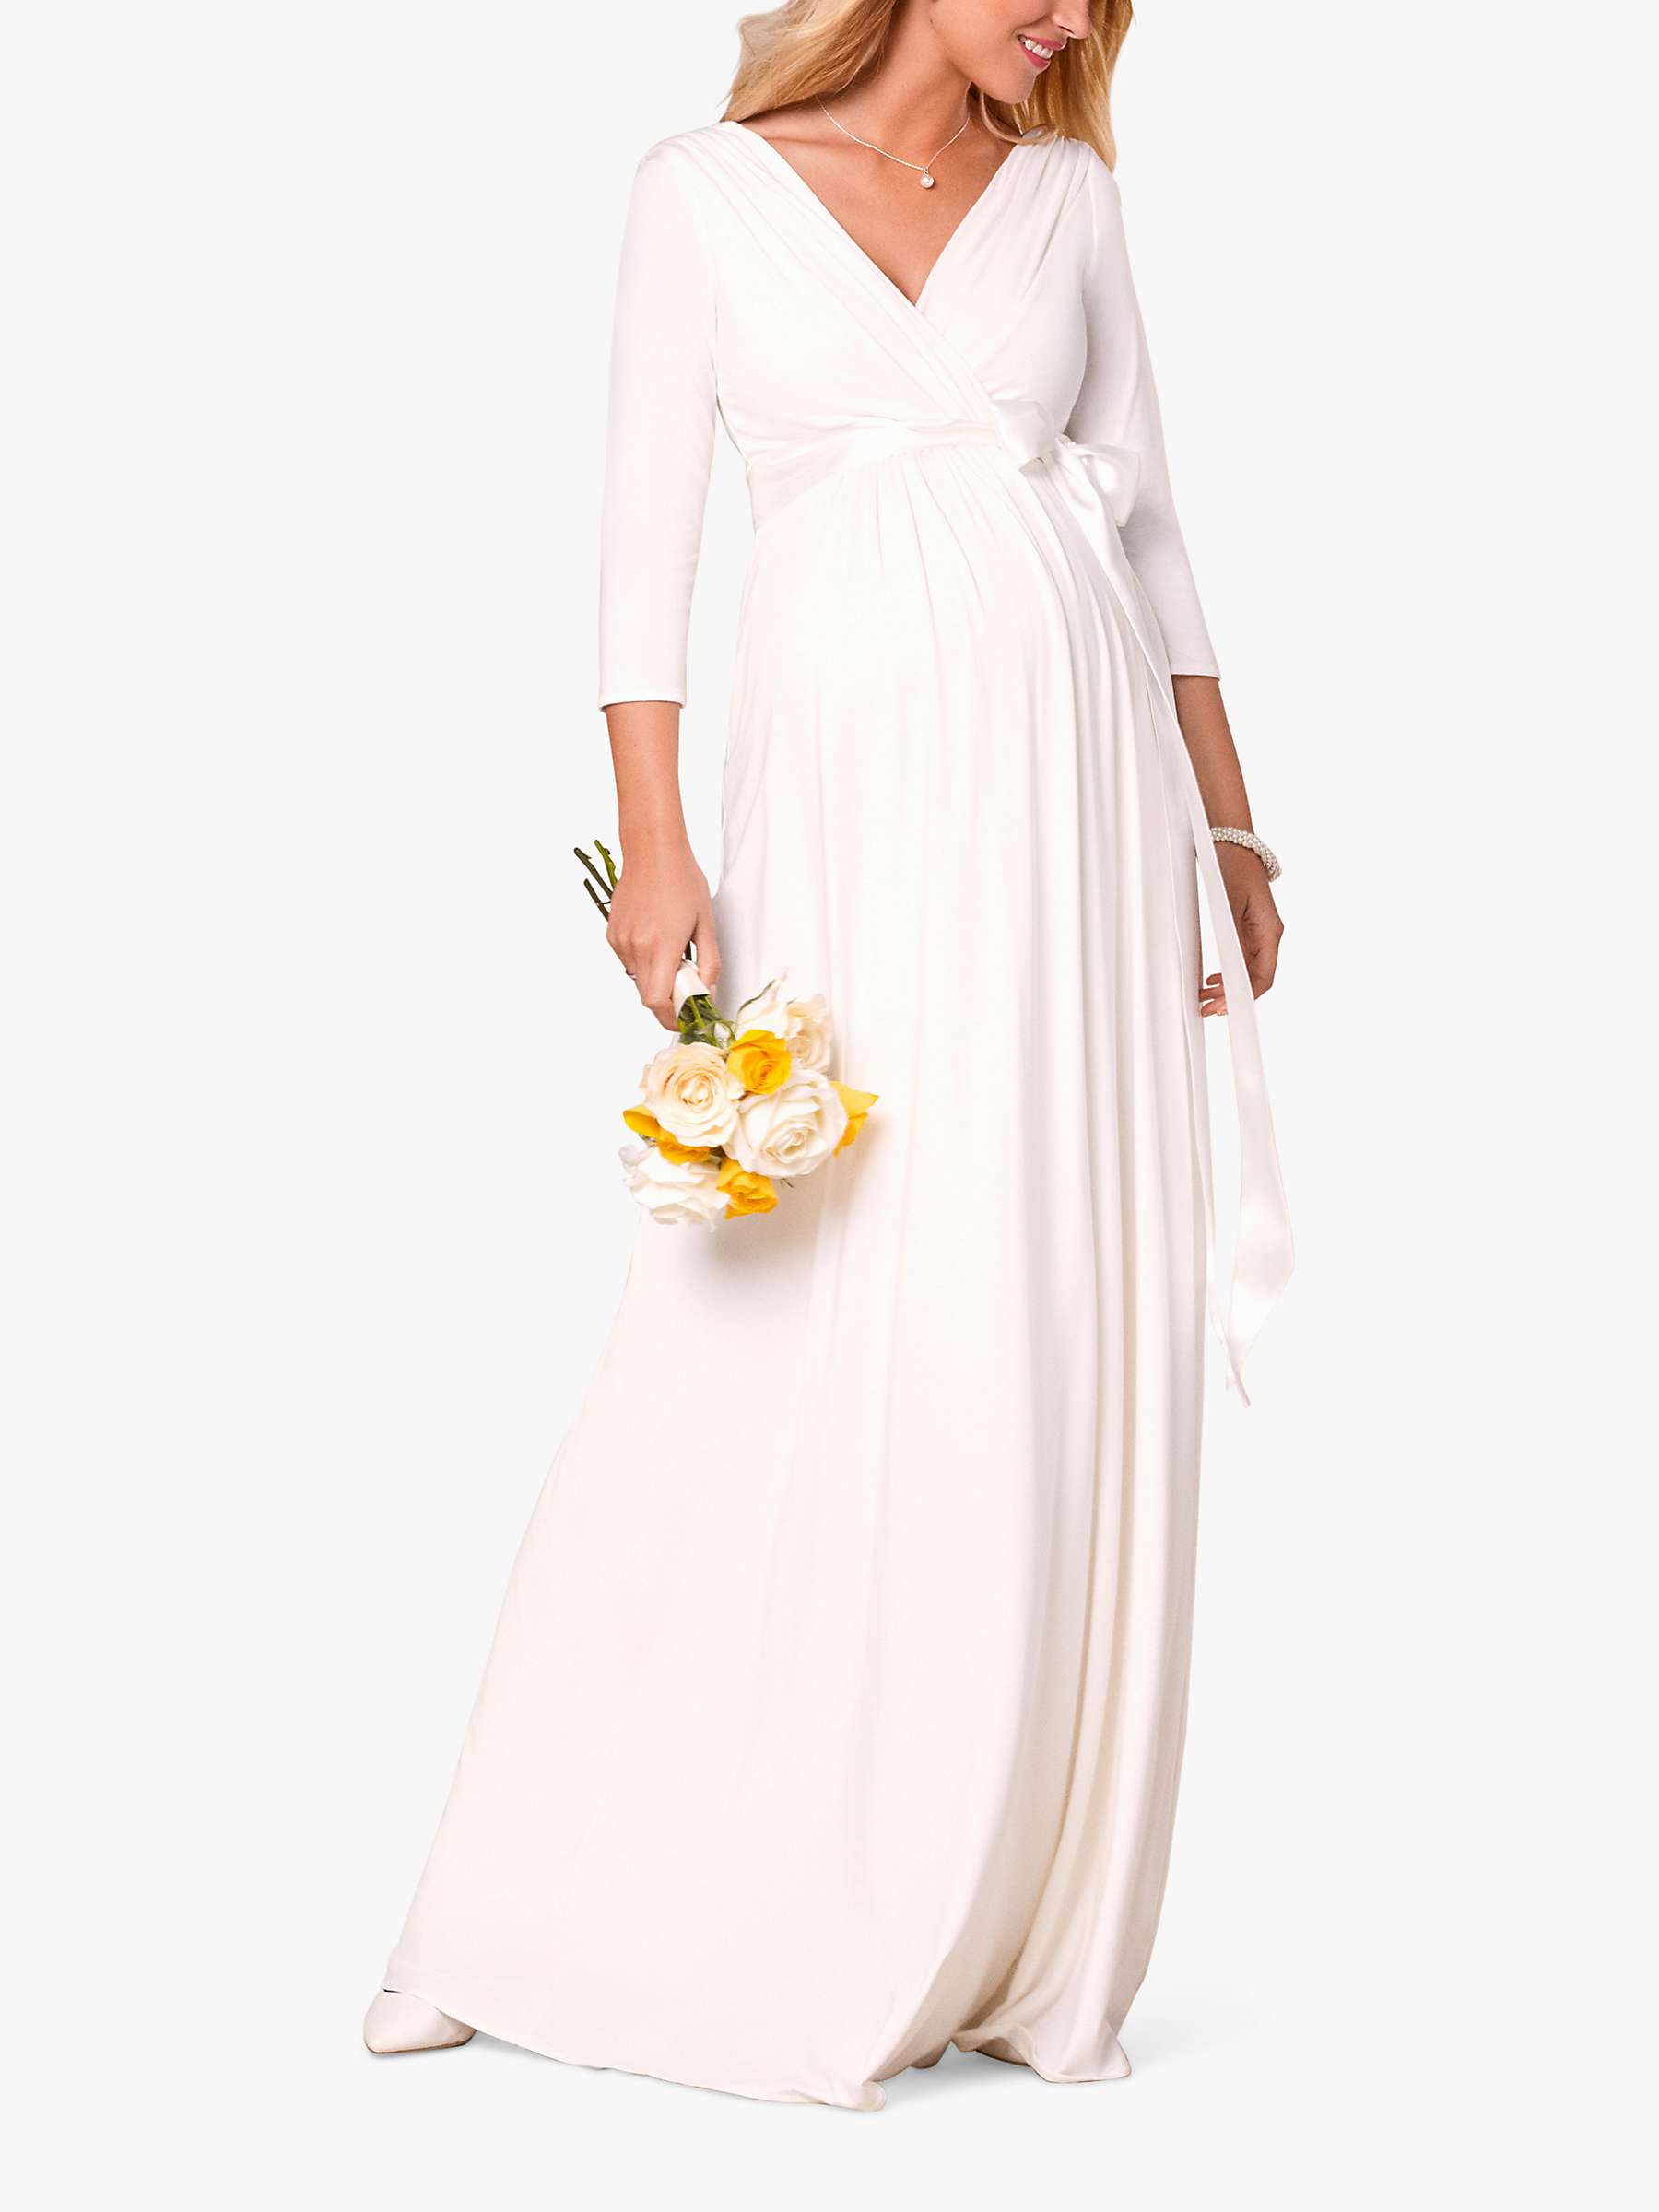 Buy Tiffany Rose Willow Maternity Wedding Dress, Ivory Online at johnlewis.com